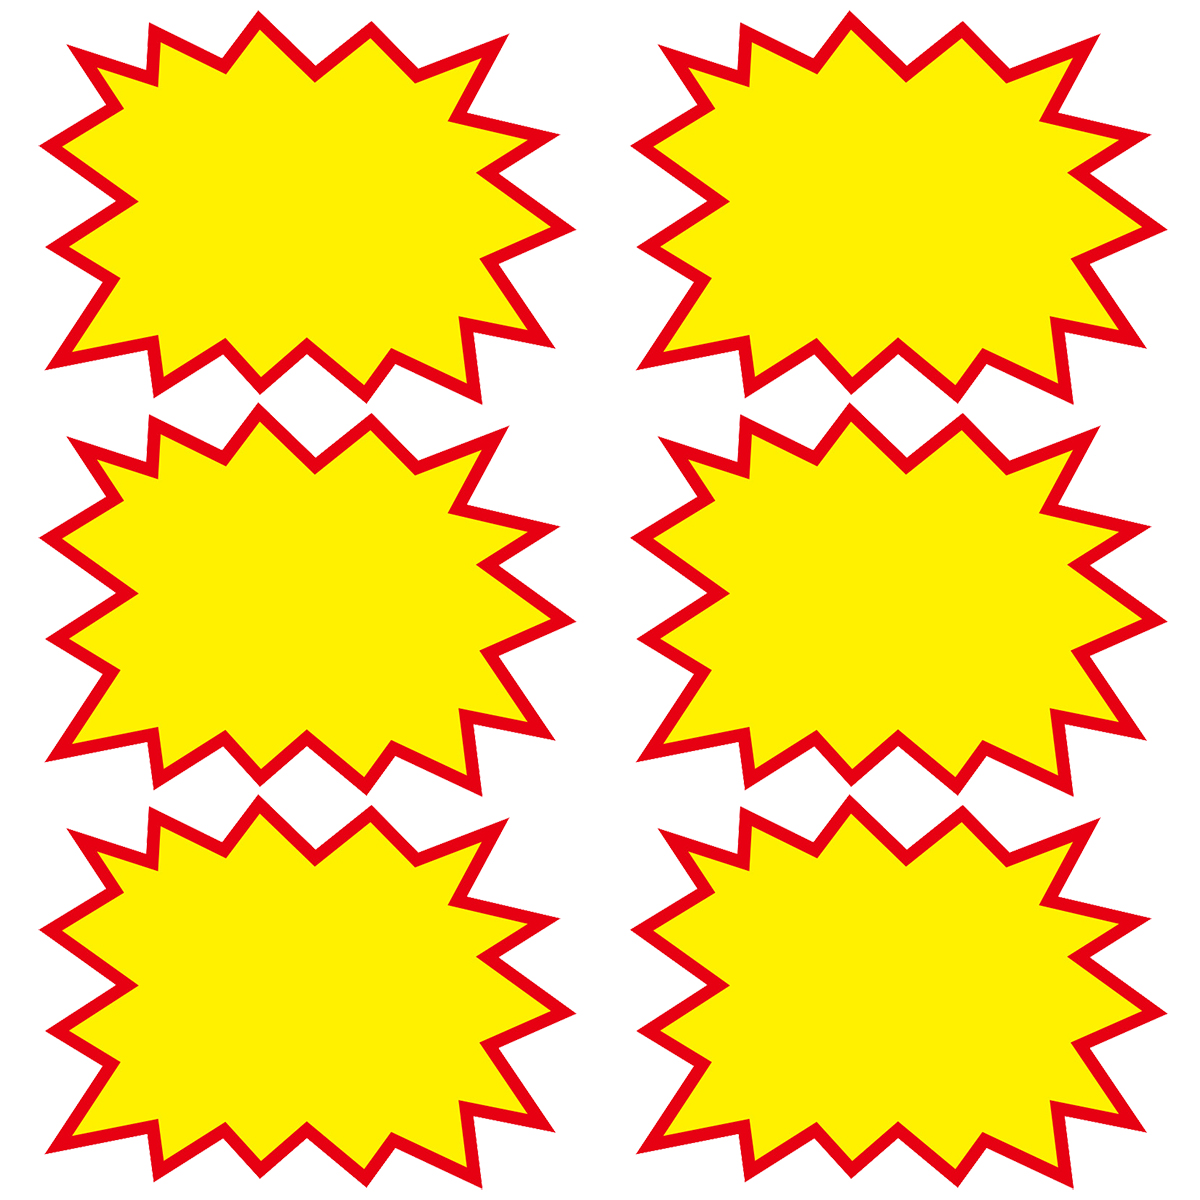 Red and Yellow-100 pcs-9"x7"RETAIL SALE SIGN Starburst Price Display Sale Signs 